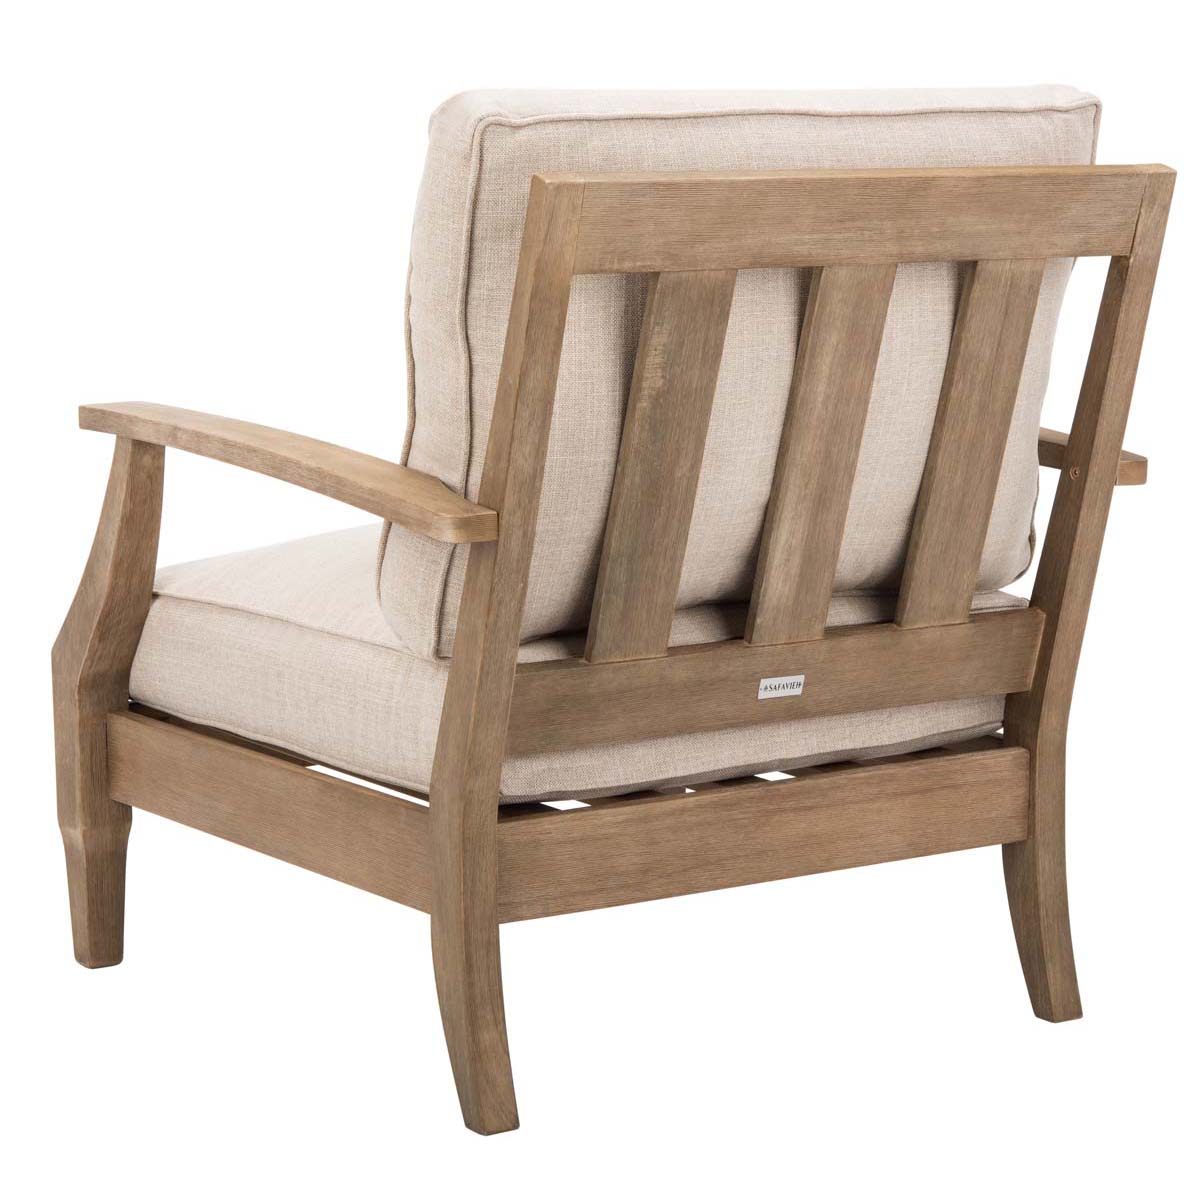 Safavieh Couture Martinique Wood Patio Armchair - Natural / White